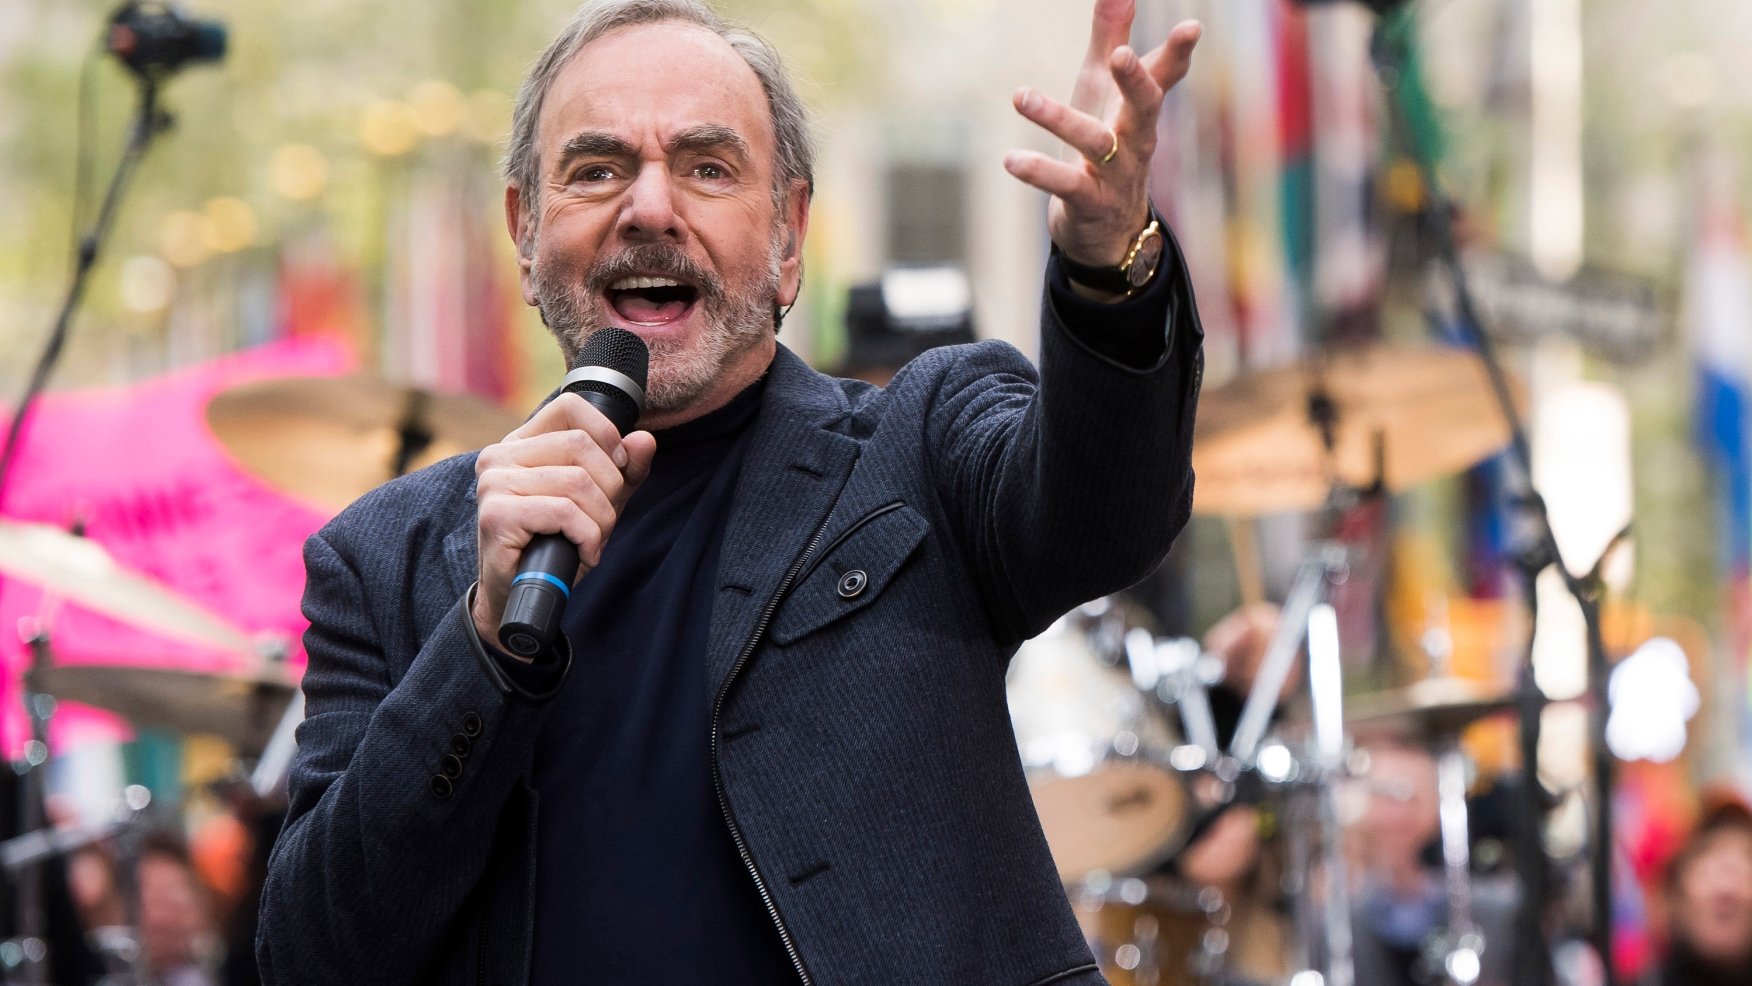 Neil Diamond says he has Parkinsons, retires from touring